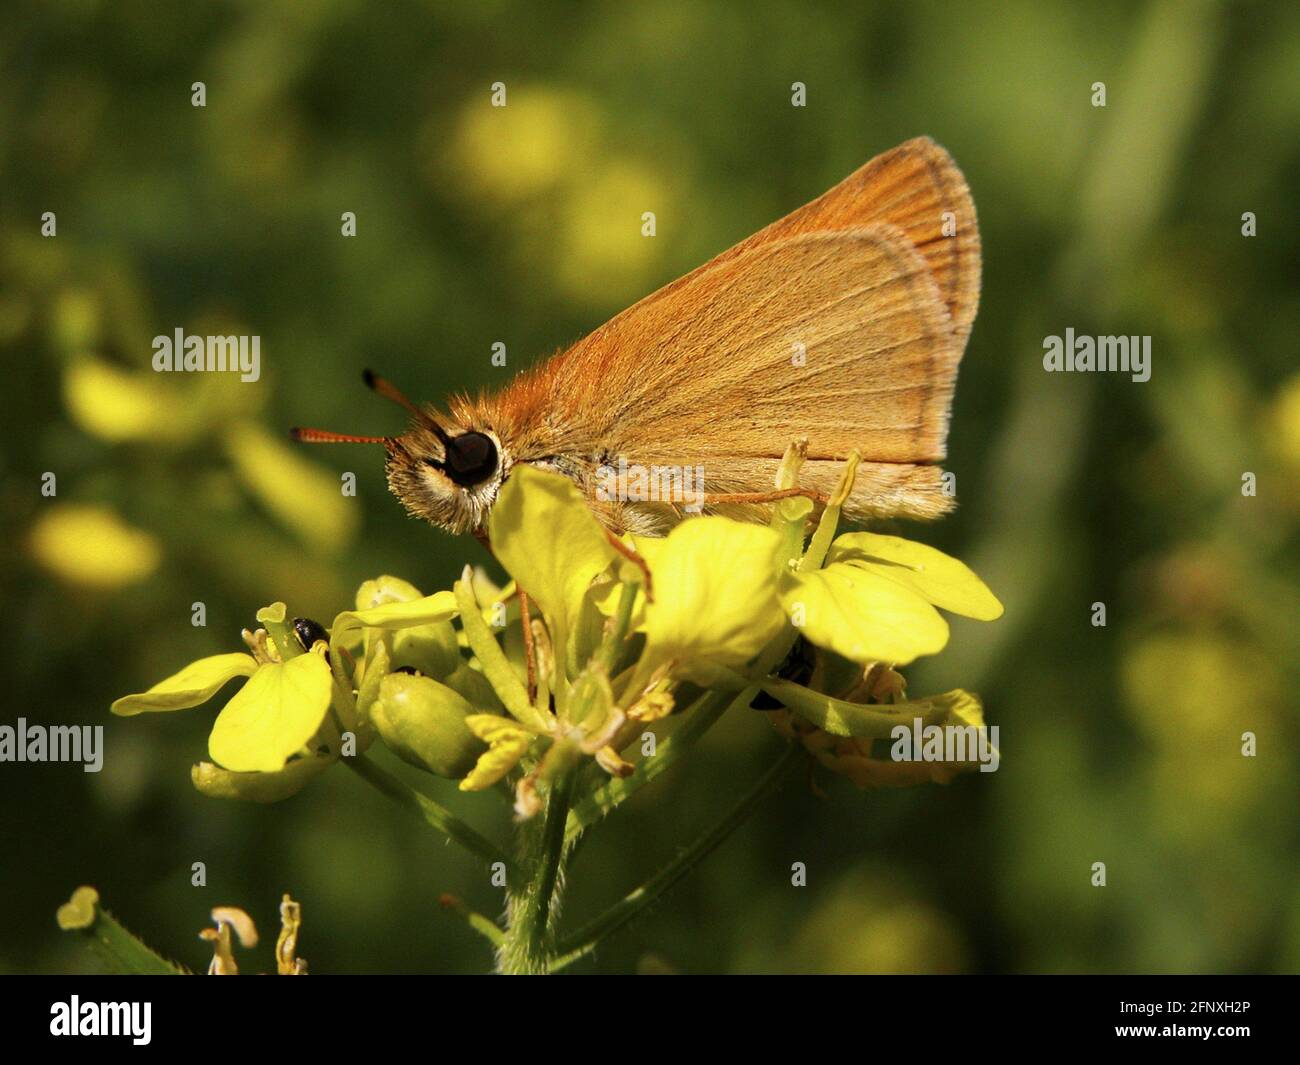 Essex skipper (Thymelicus lineolus, Thymelicus lineola), sits on a flower, Austria Stock Photo